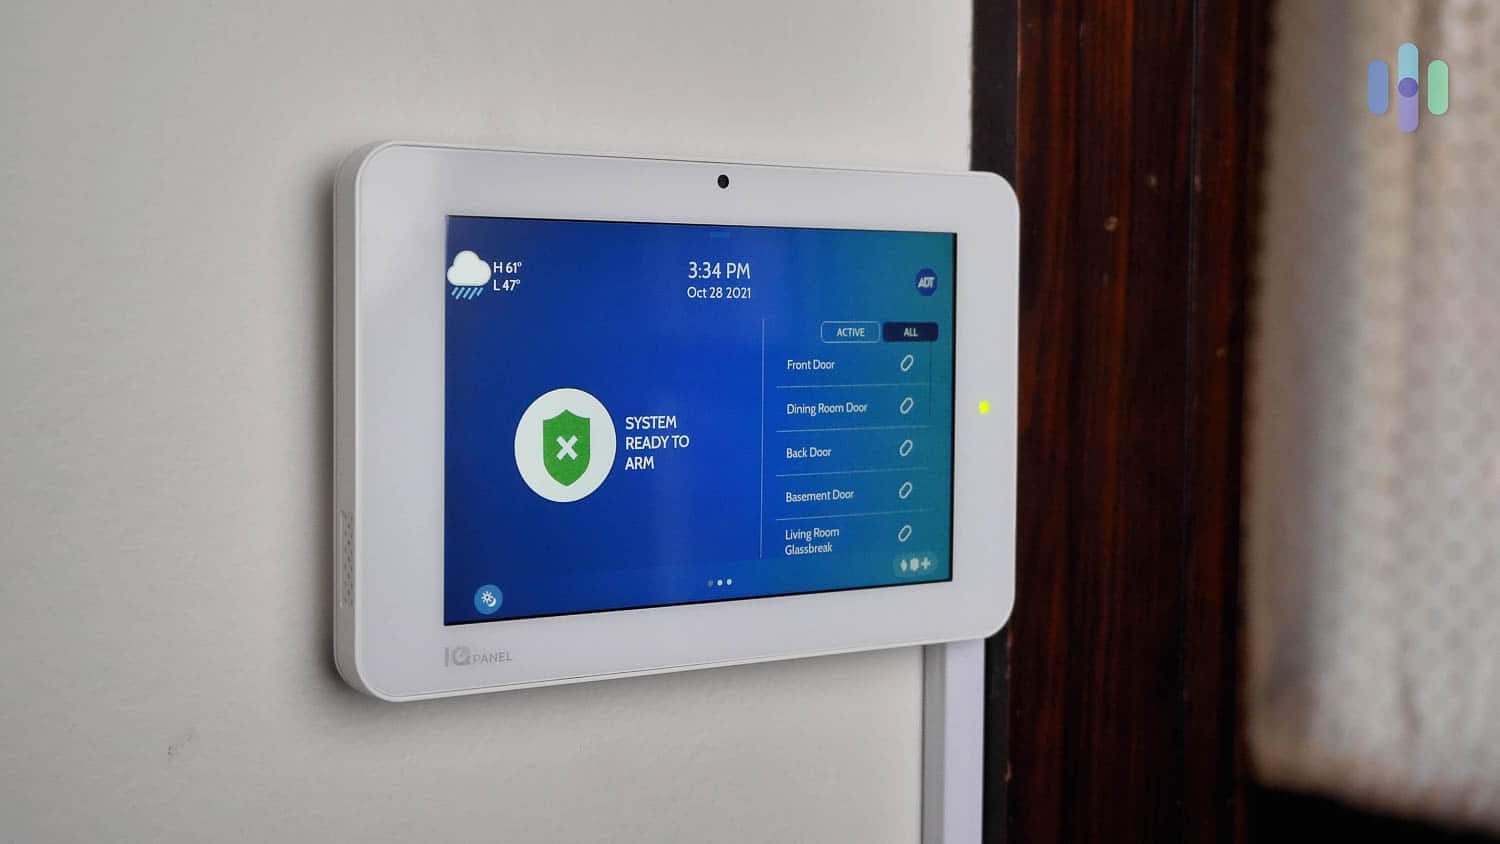 How Much Does ADT Smart Home Cost